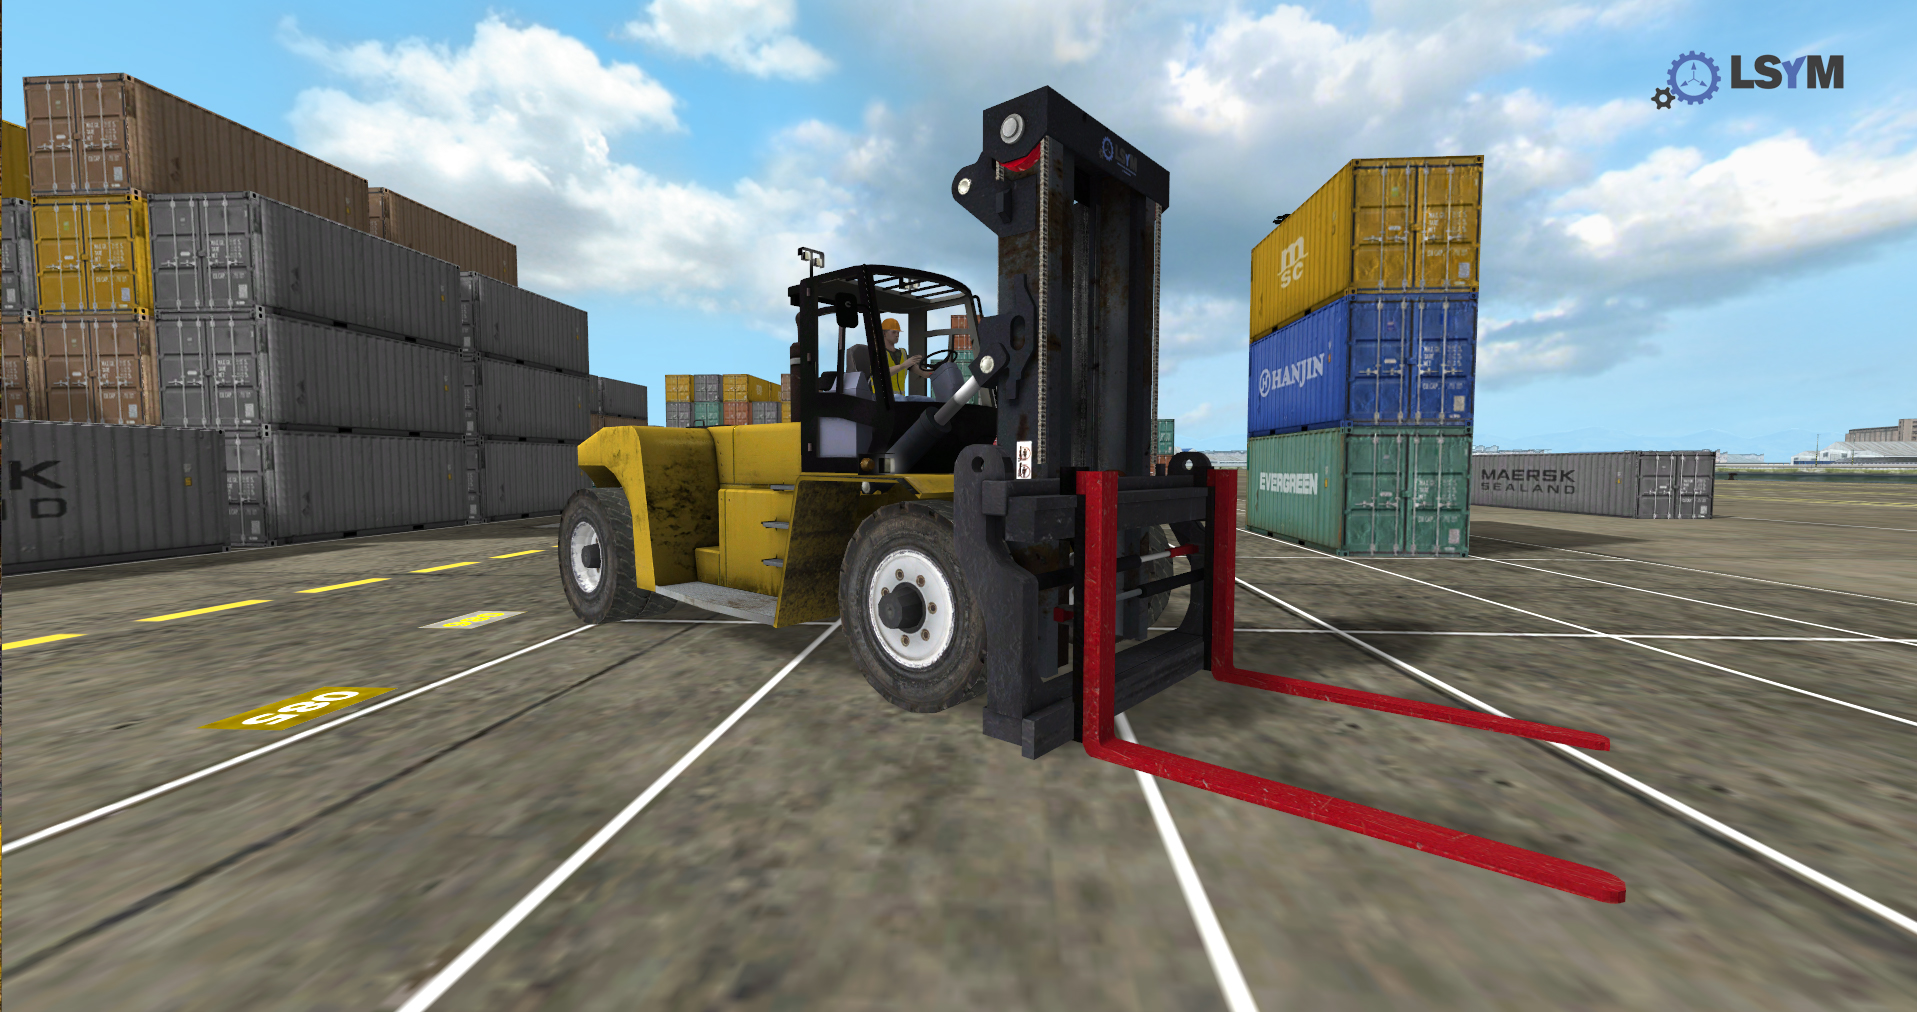 High Capacity Forklift Simulator front view